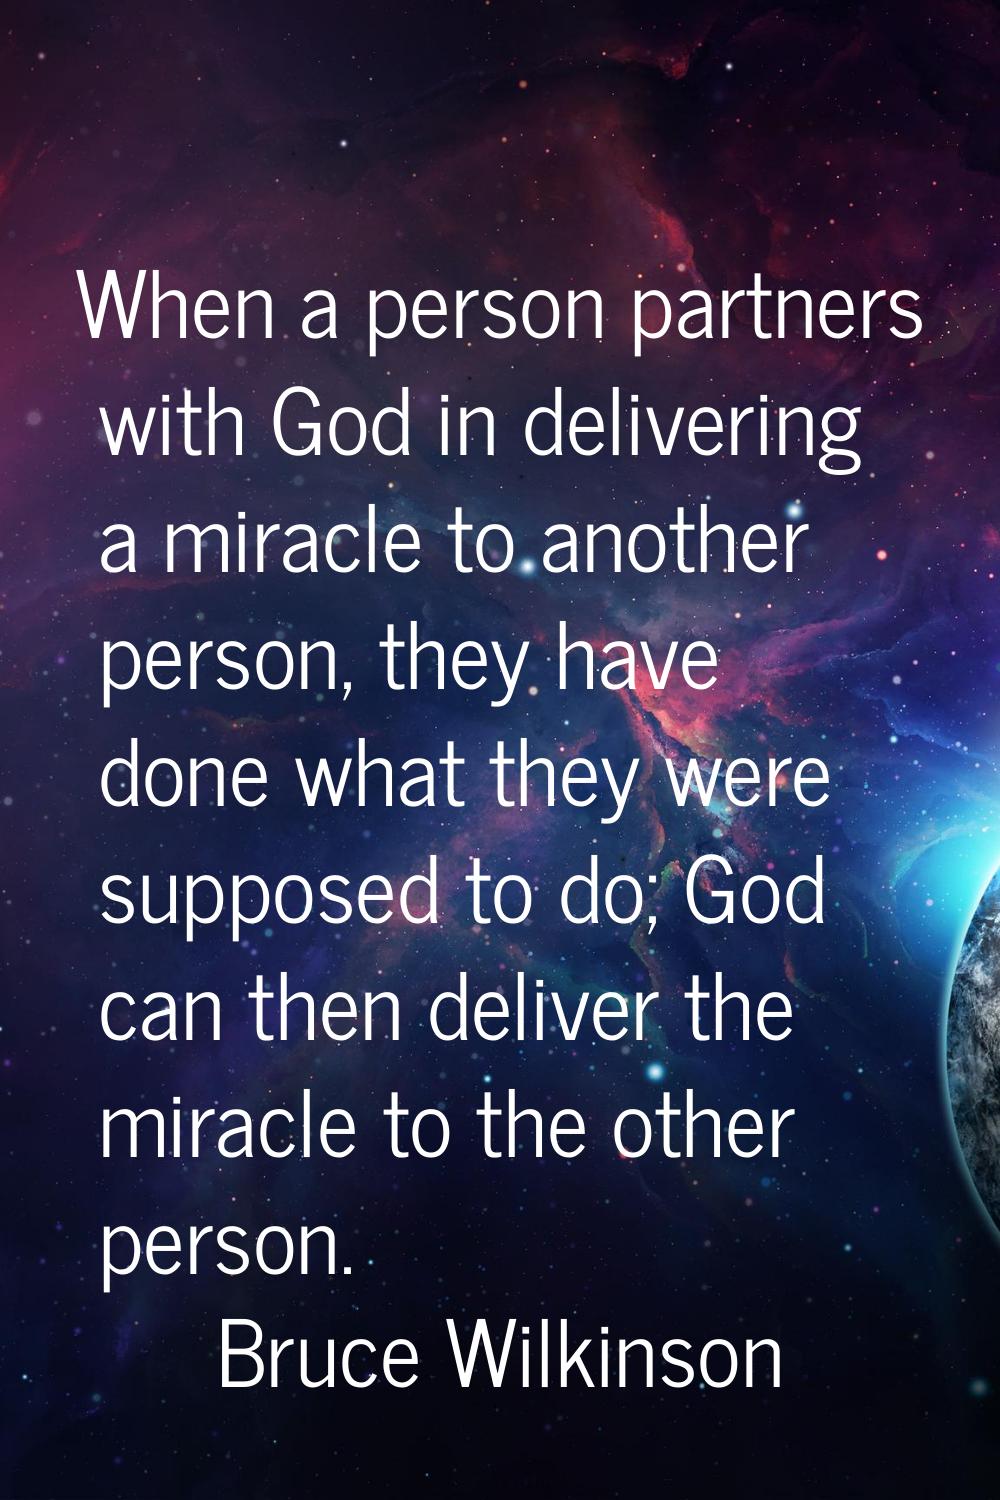 When a person partners with God in delivering a miracle to another person, they have done what they